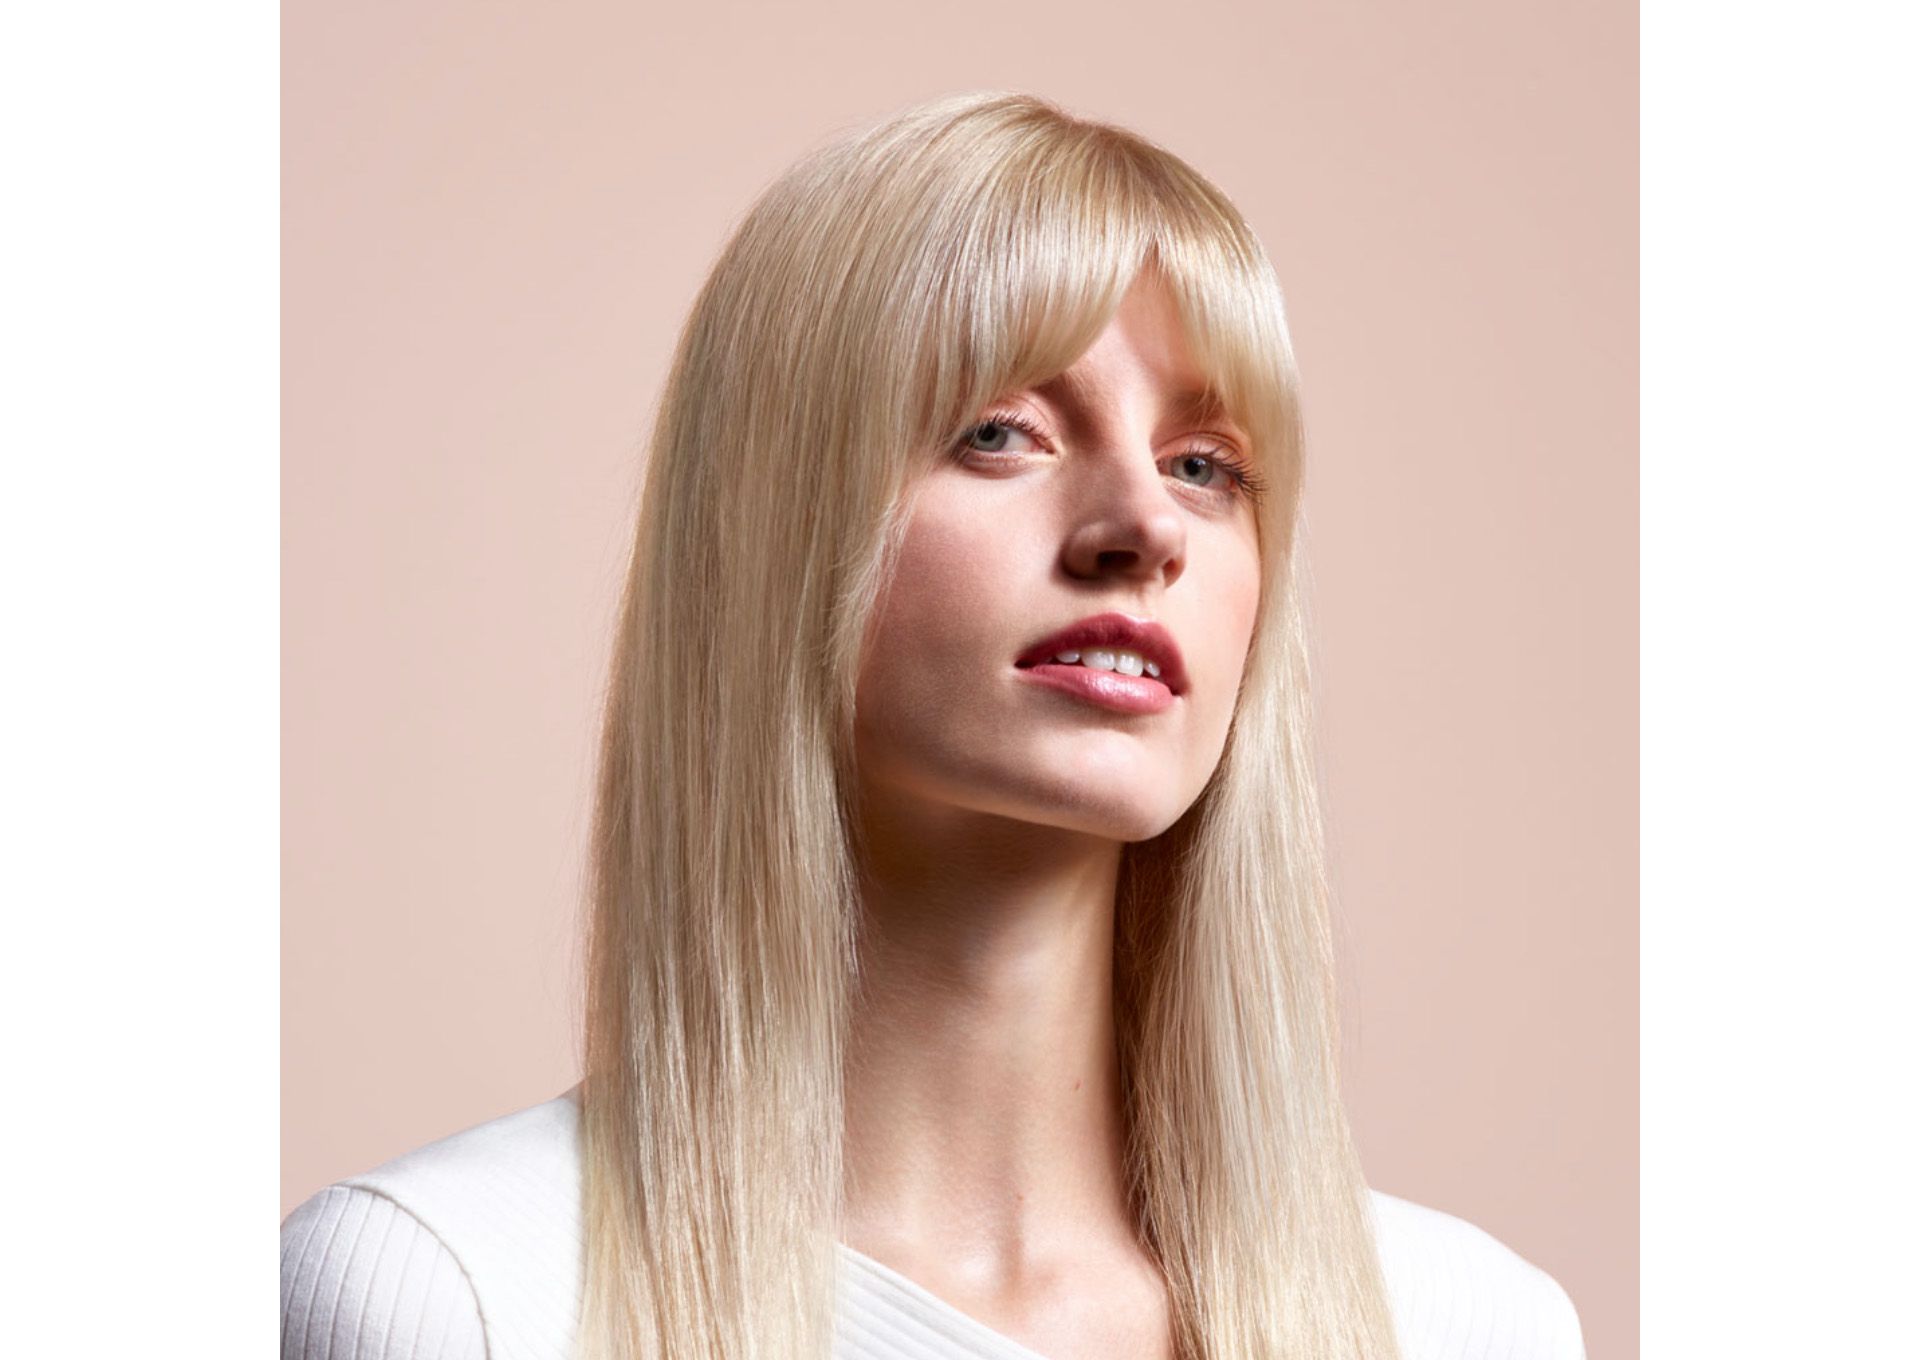 A model with long, blonde hair wearing a straight style.